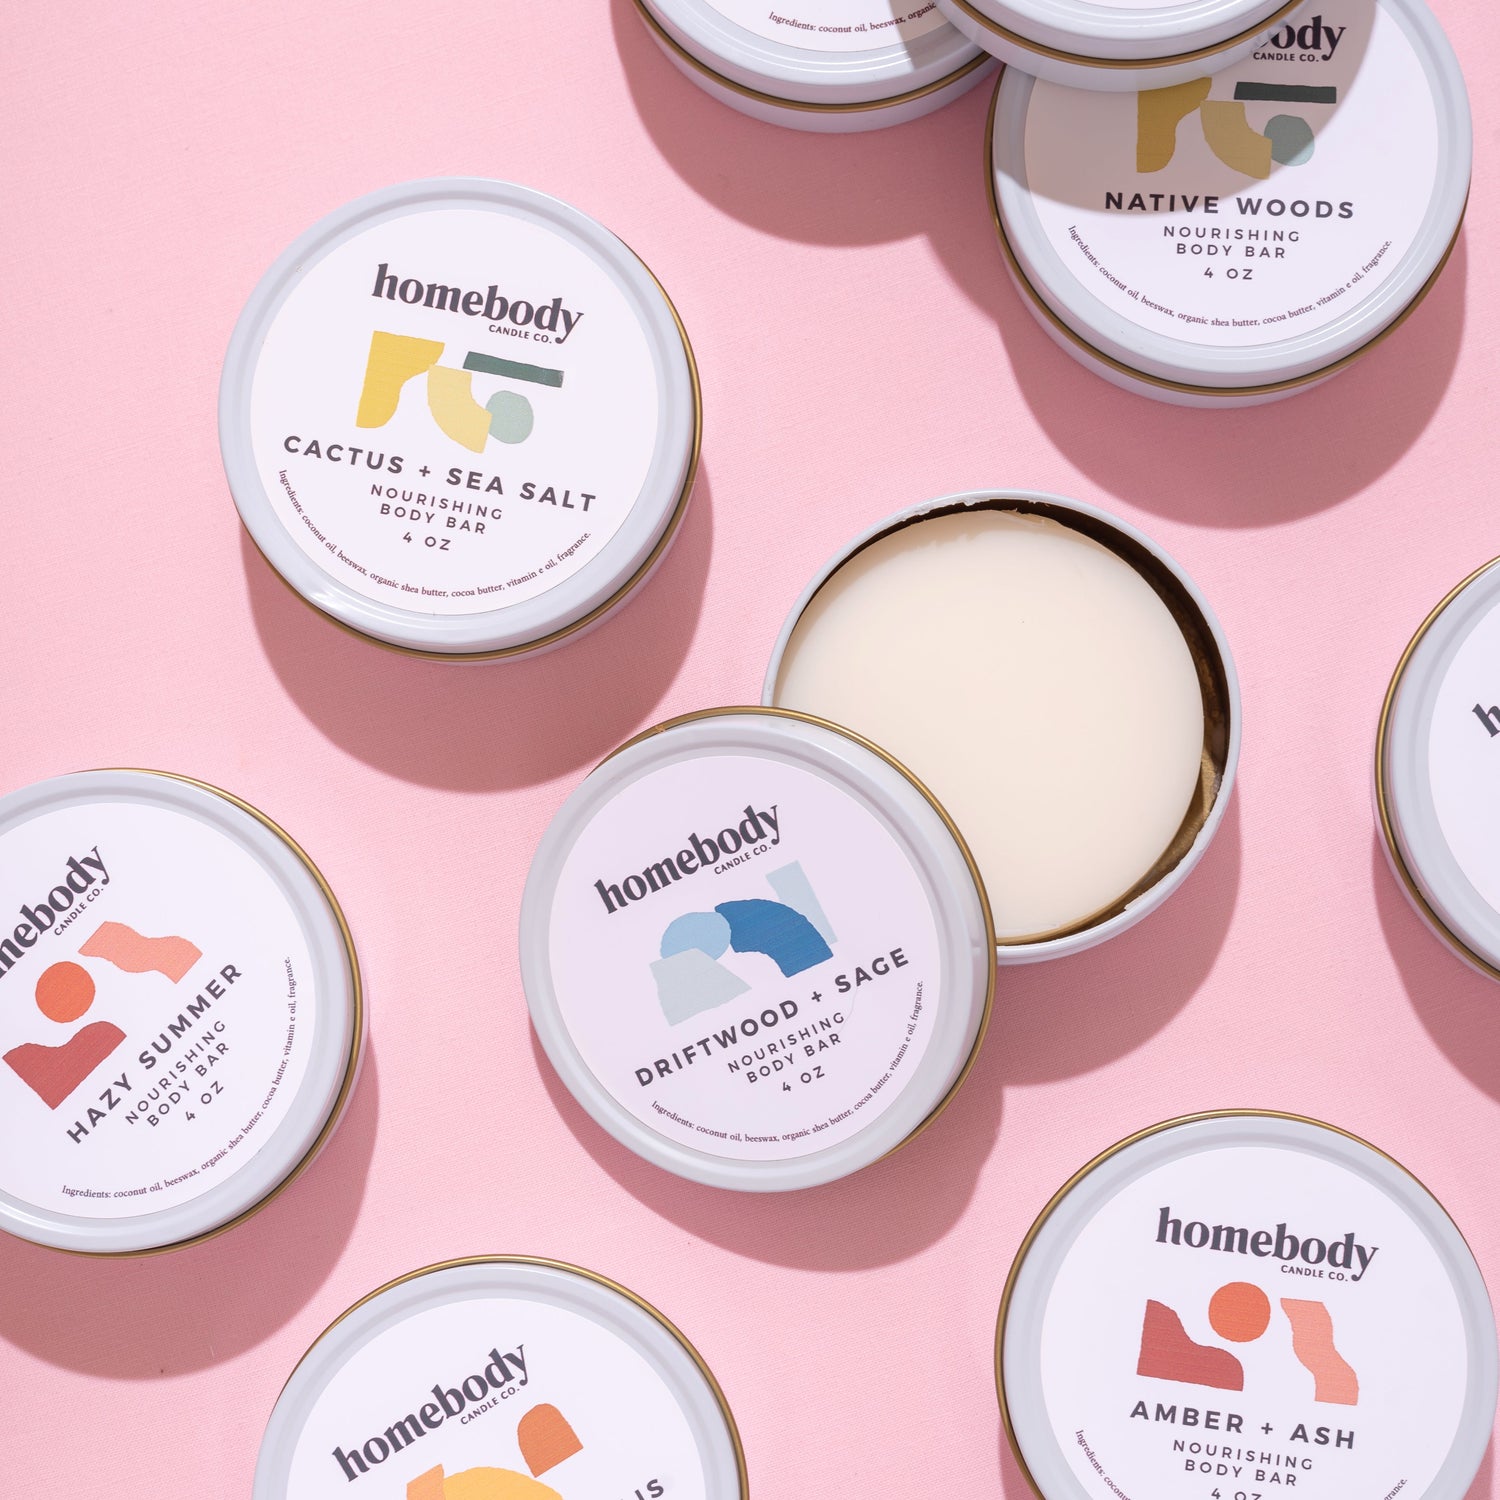 Body Bars-Homebody Candle Co.